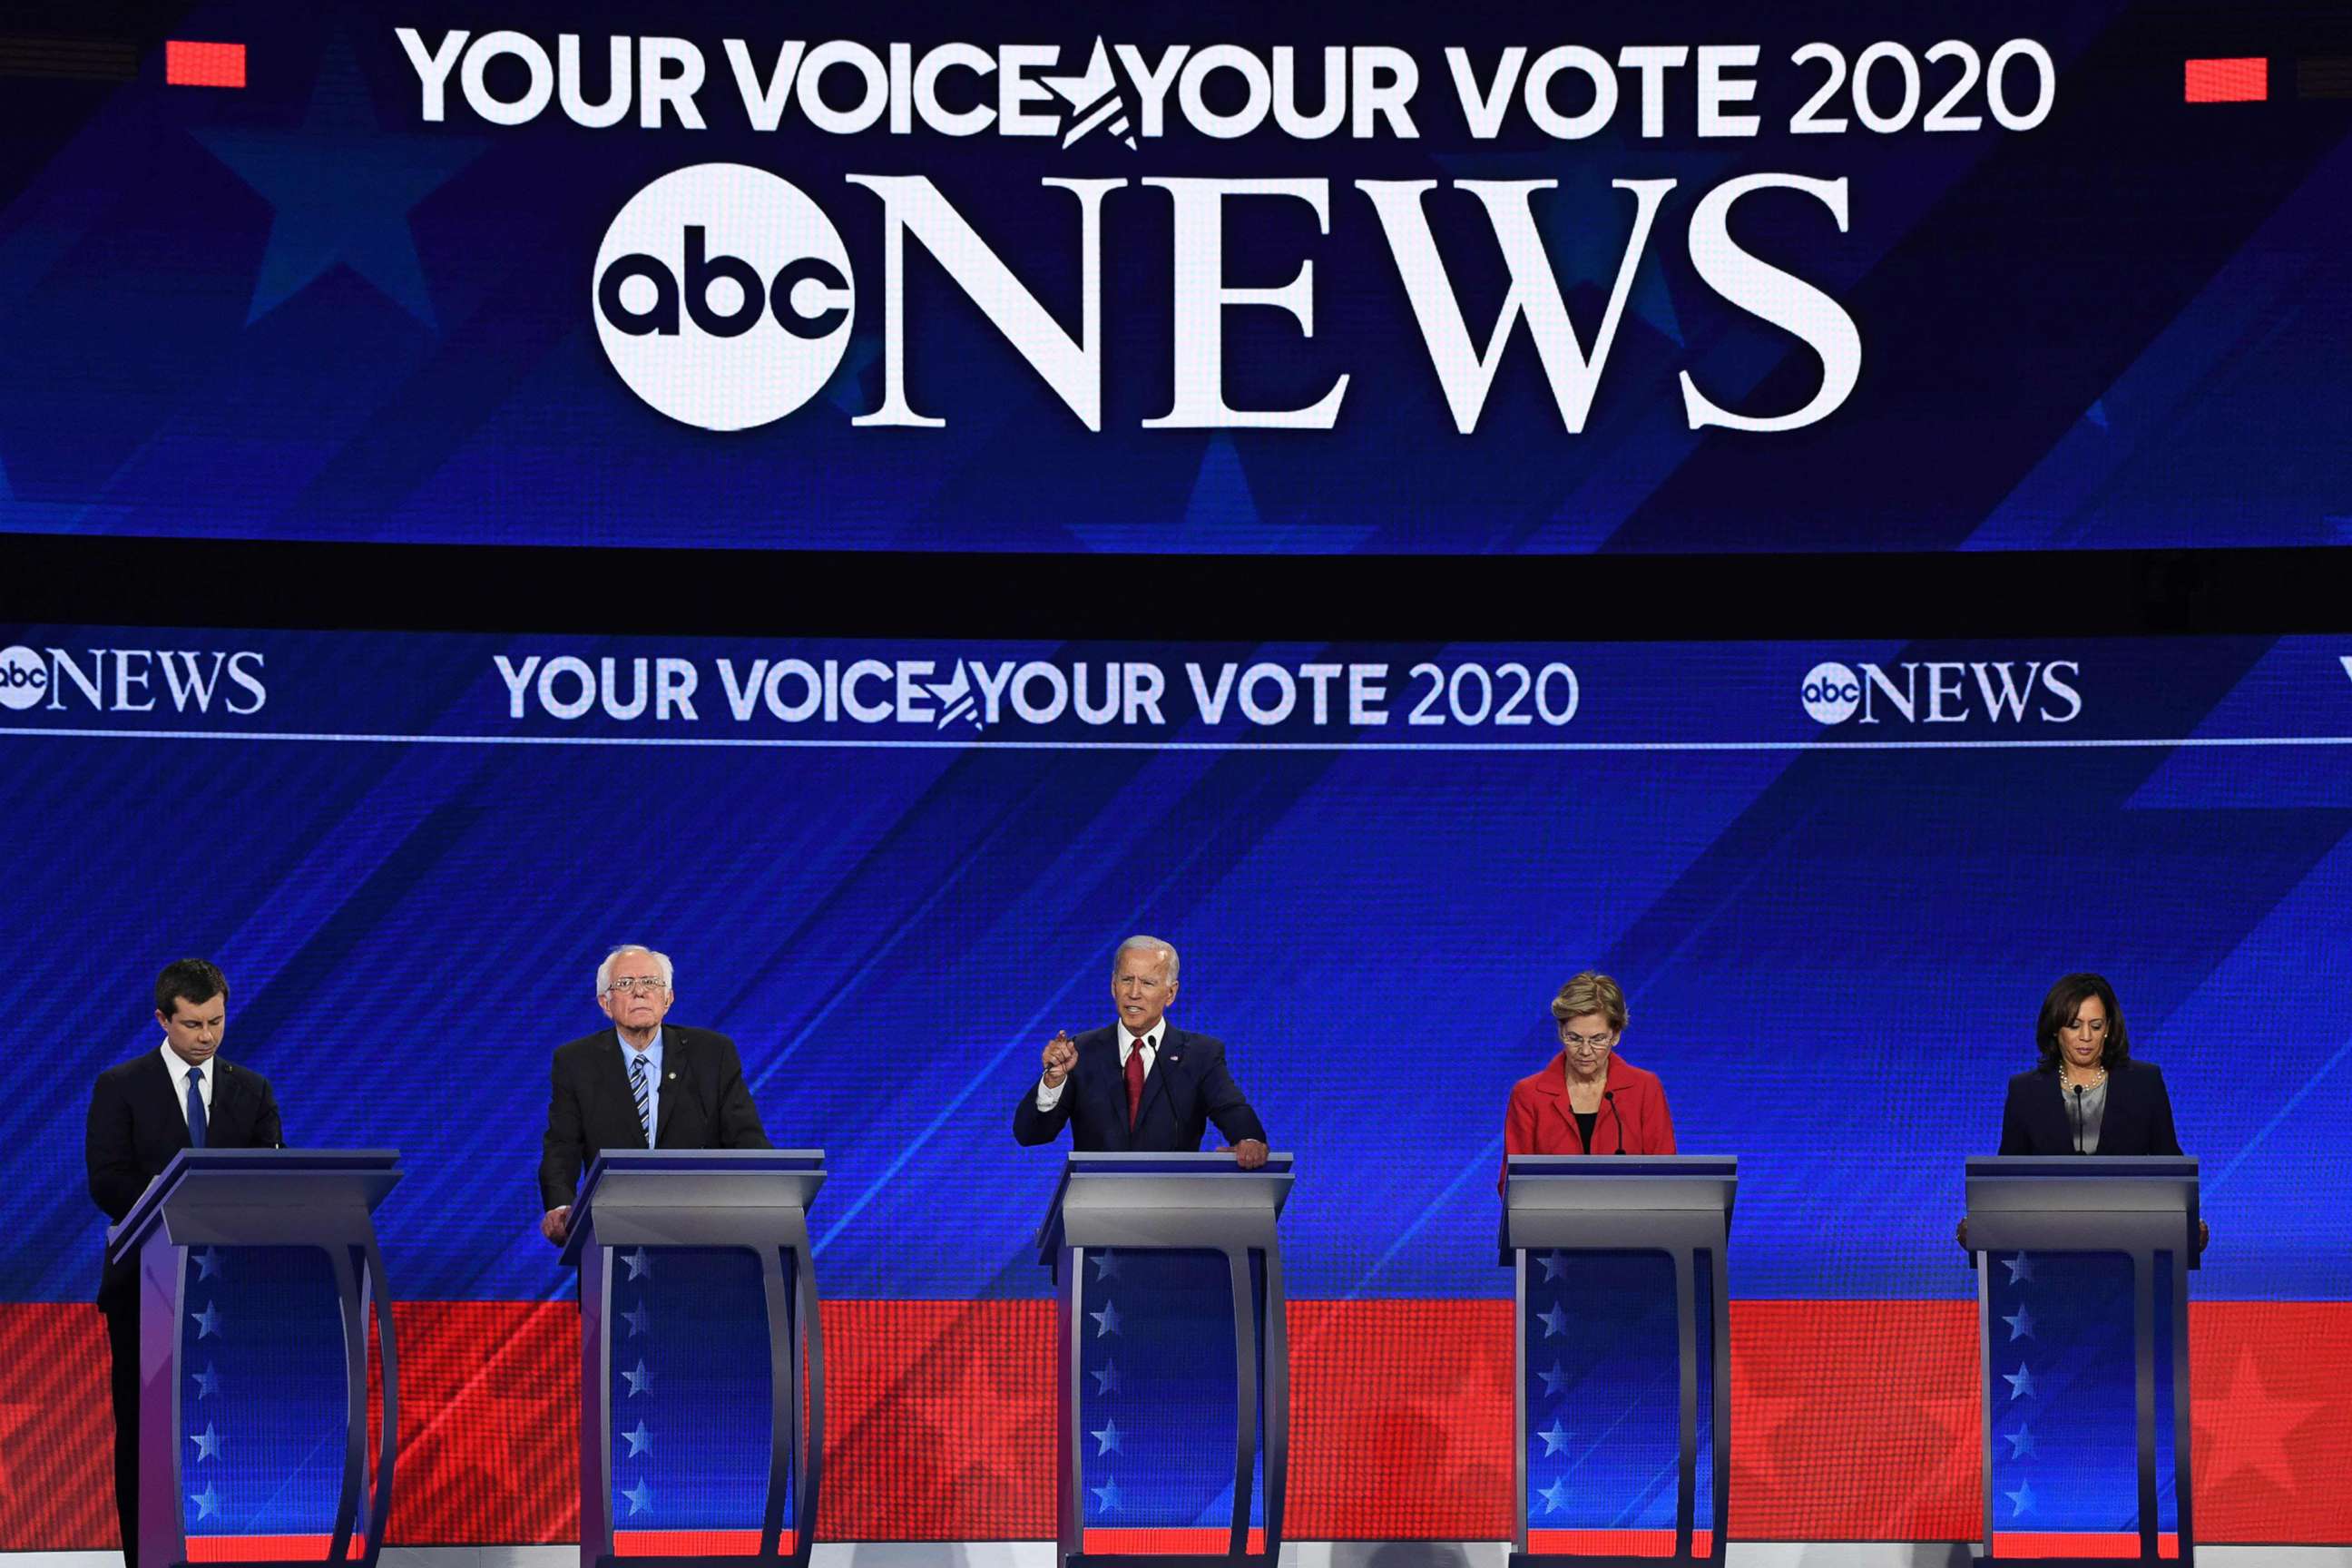 PHOTO: Democratic presidential hopefuls speak during the third Democratic primary debate of the 2020 presidential campaign season hosted by ABC News in partnership with Univision at Texas Southern University in Houston, Tx. on Sept. 12, 2019.